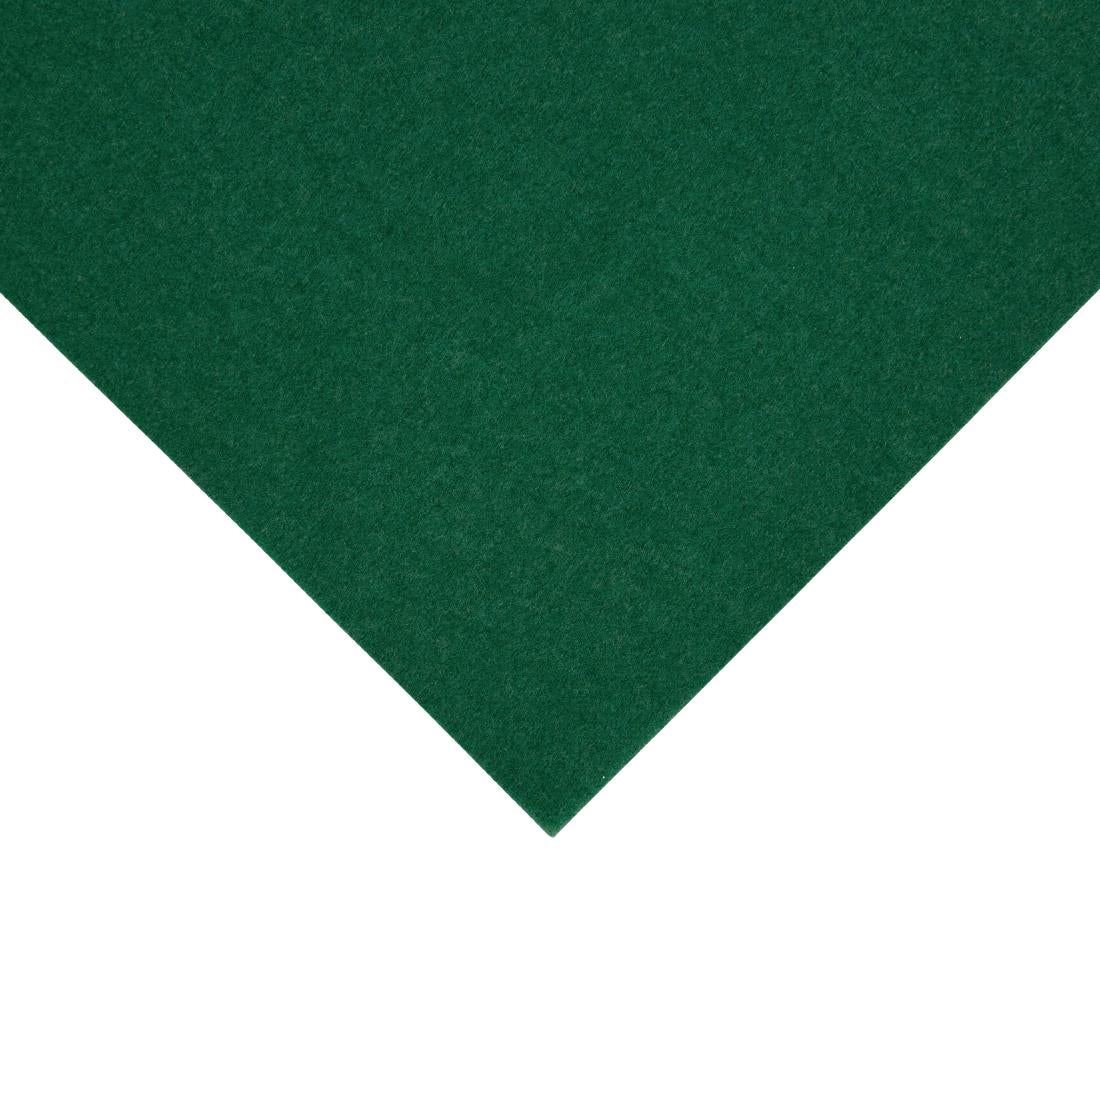 FE223 Fiesta Recyclable Lunch Napkin Green 33x33cm 2ply 1/4 Fold (Pack of 2000) JD Catering Equipment Solutions Ltd